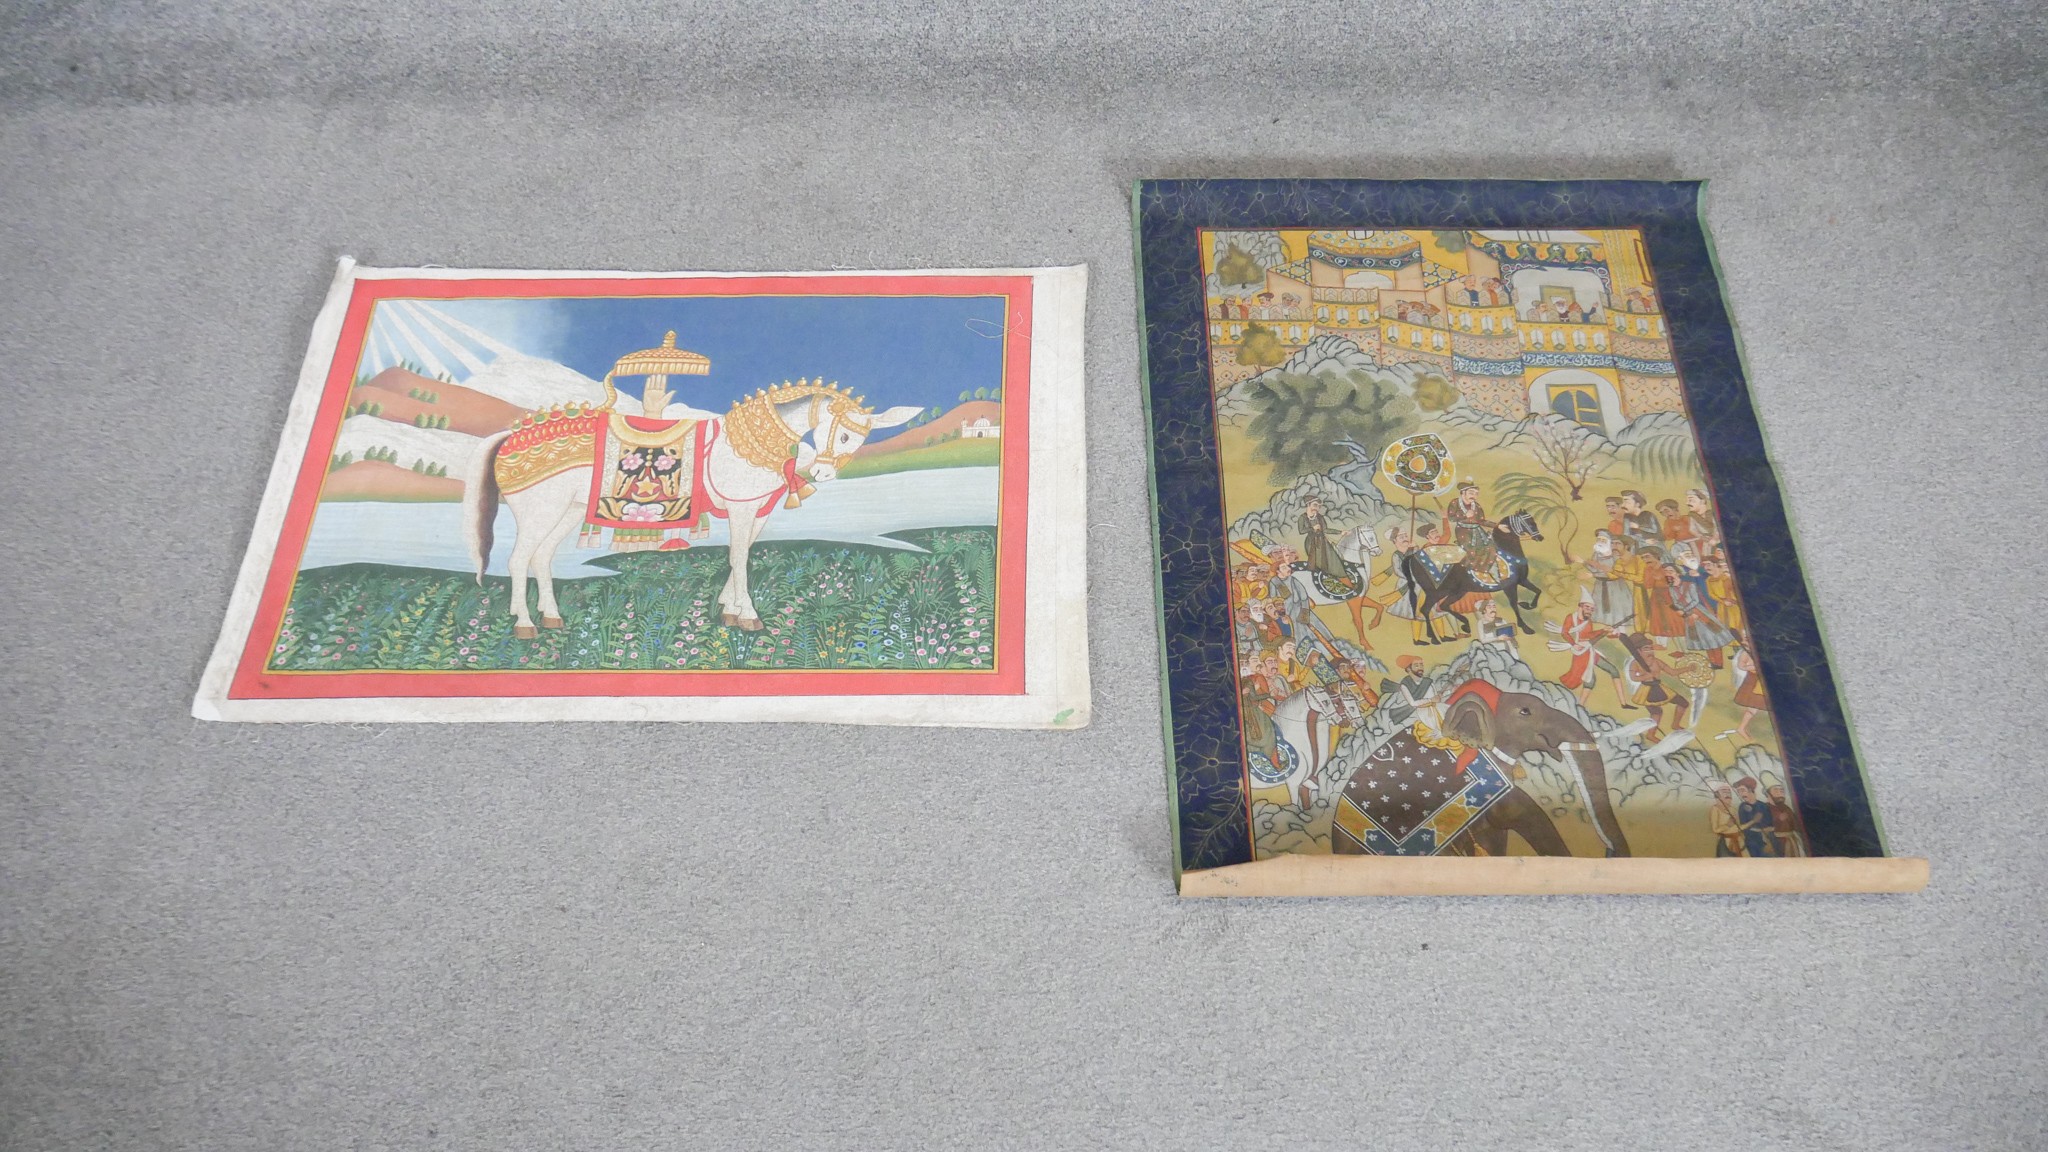 An unframed Indo-Persian painting on fabric of Imam Ali's white horse along with another depicting a